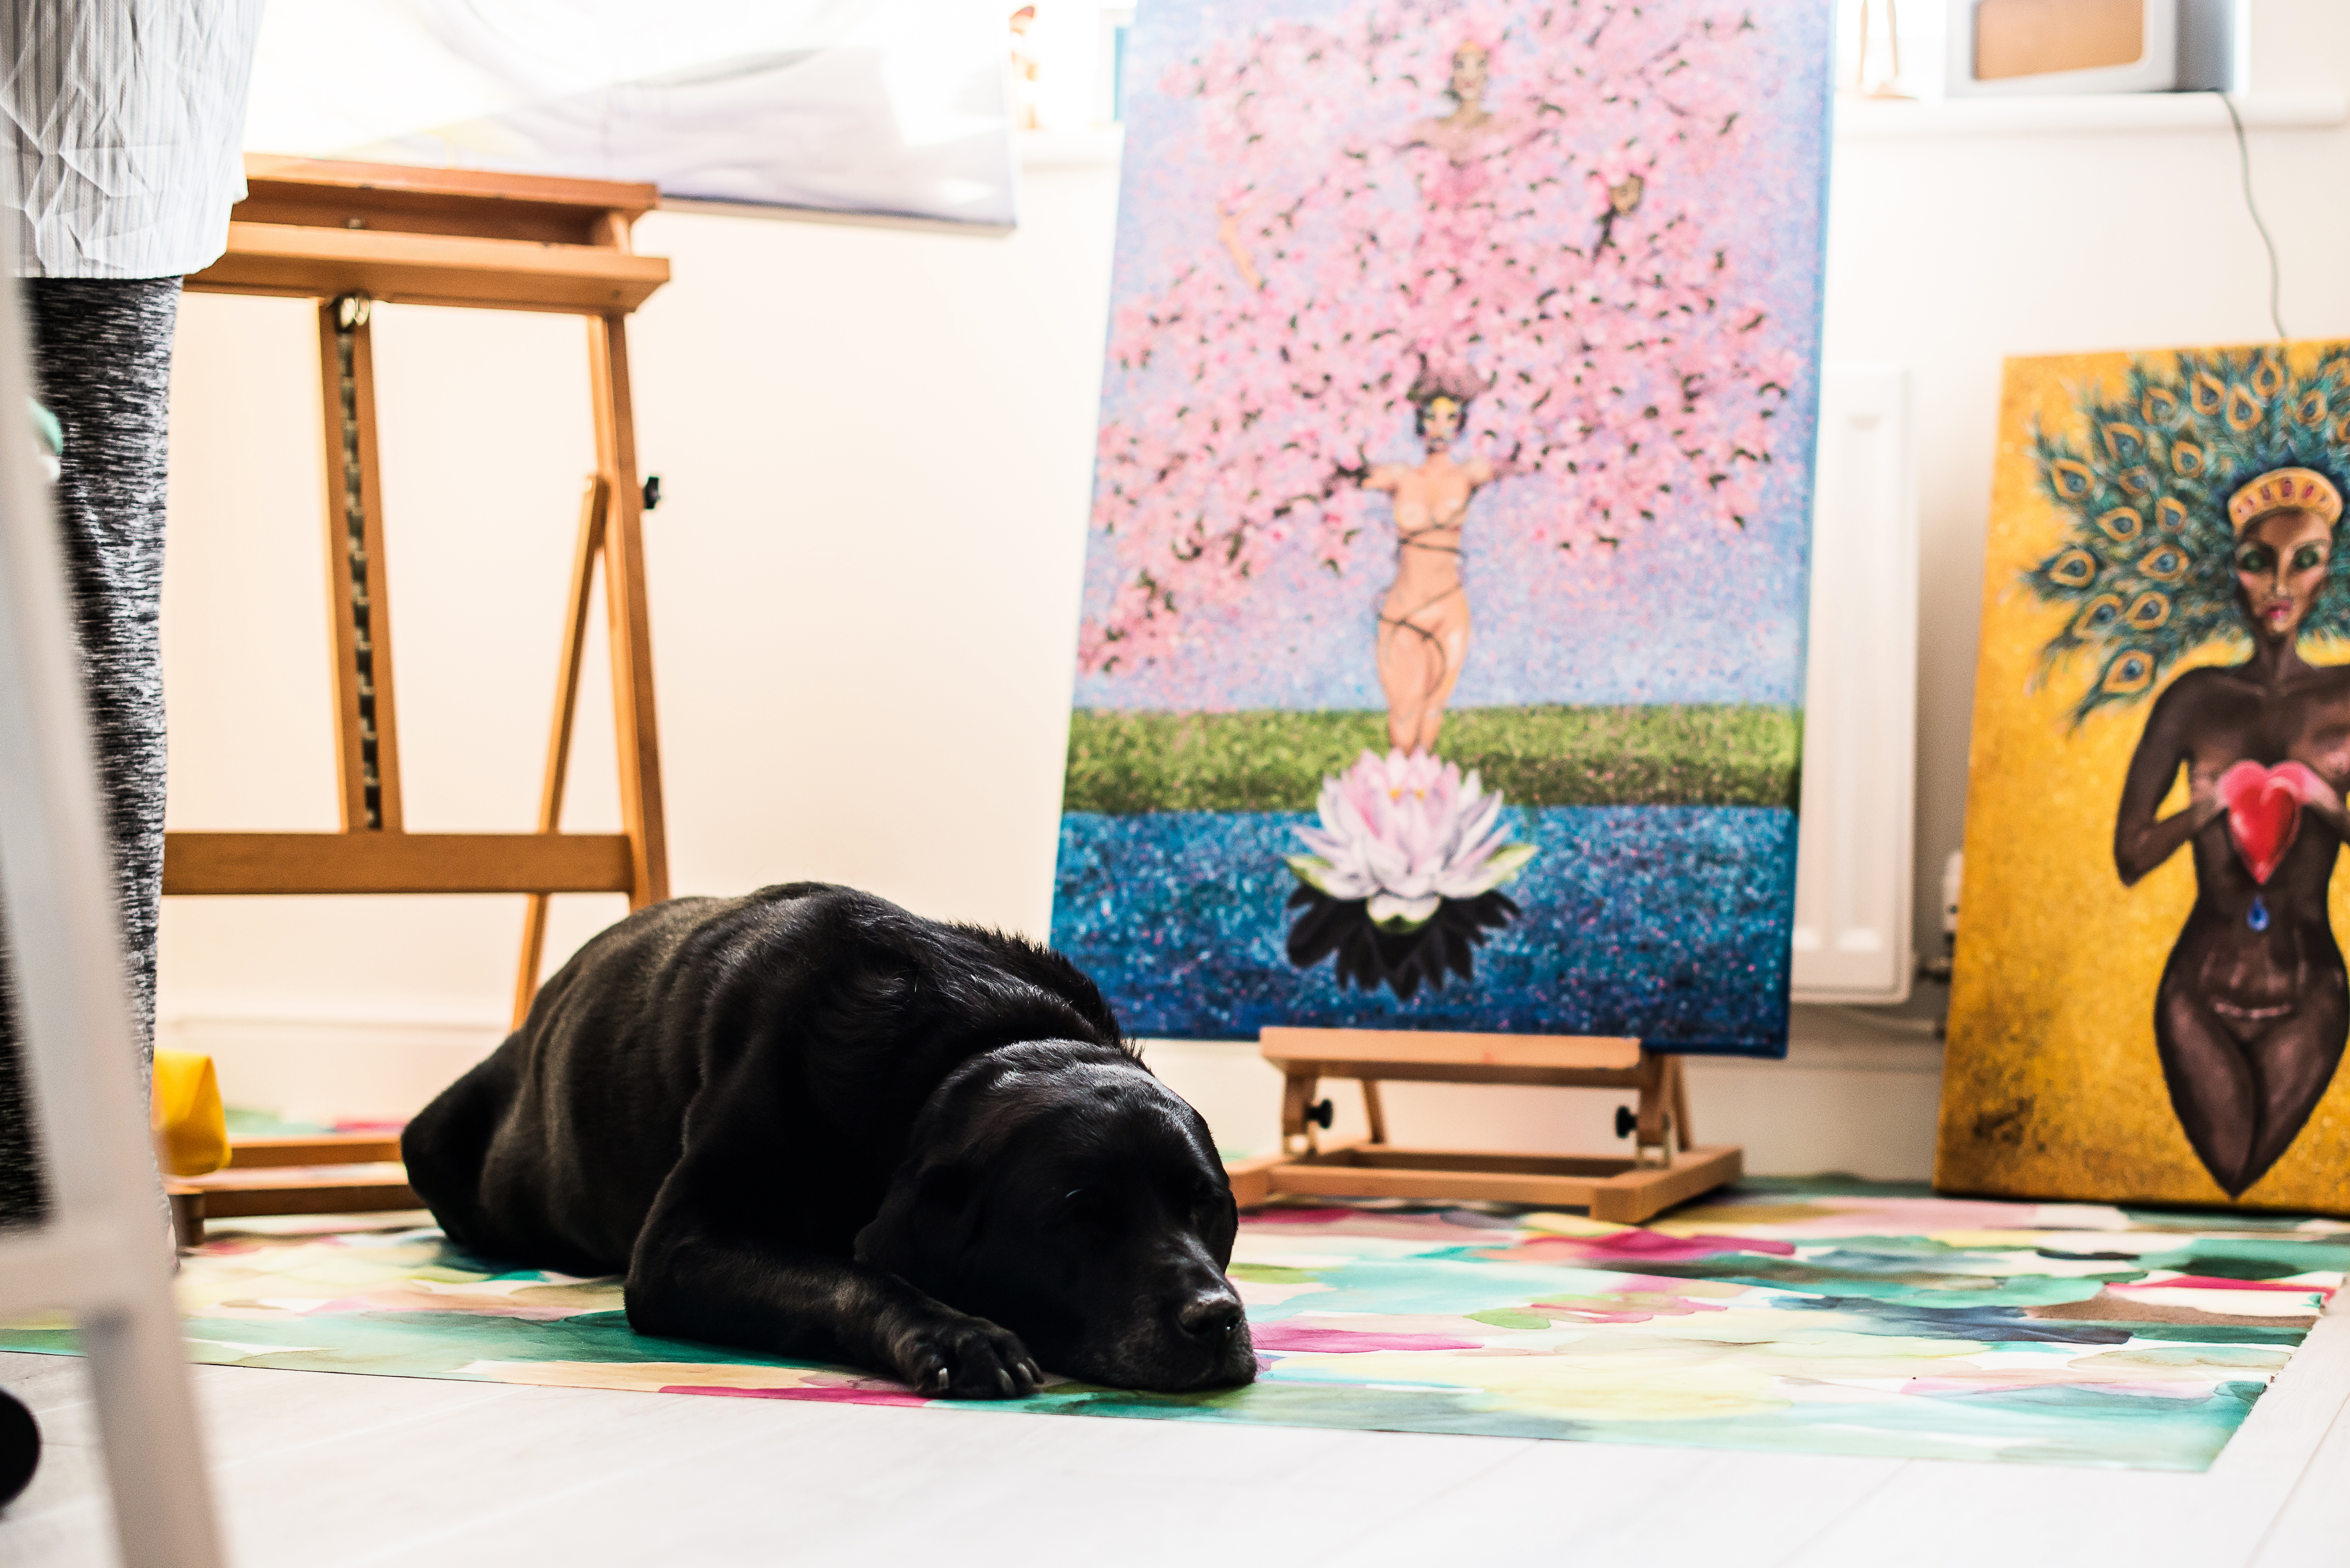 Picture of a black labrador dog in an art studio
Credited to Natashga Holland Photography